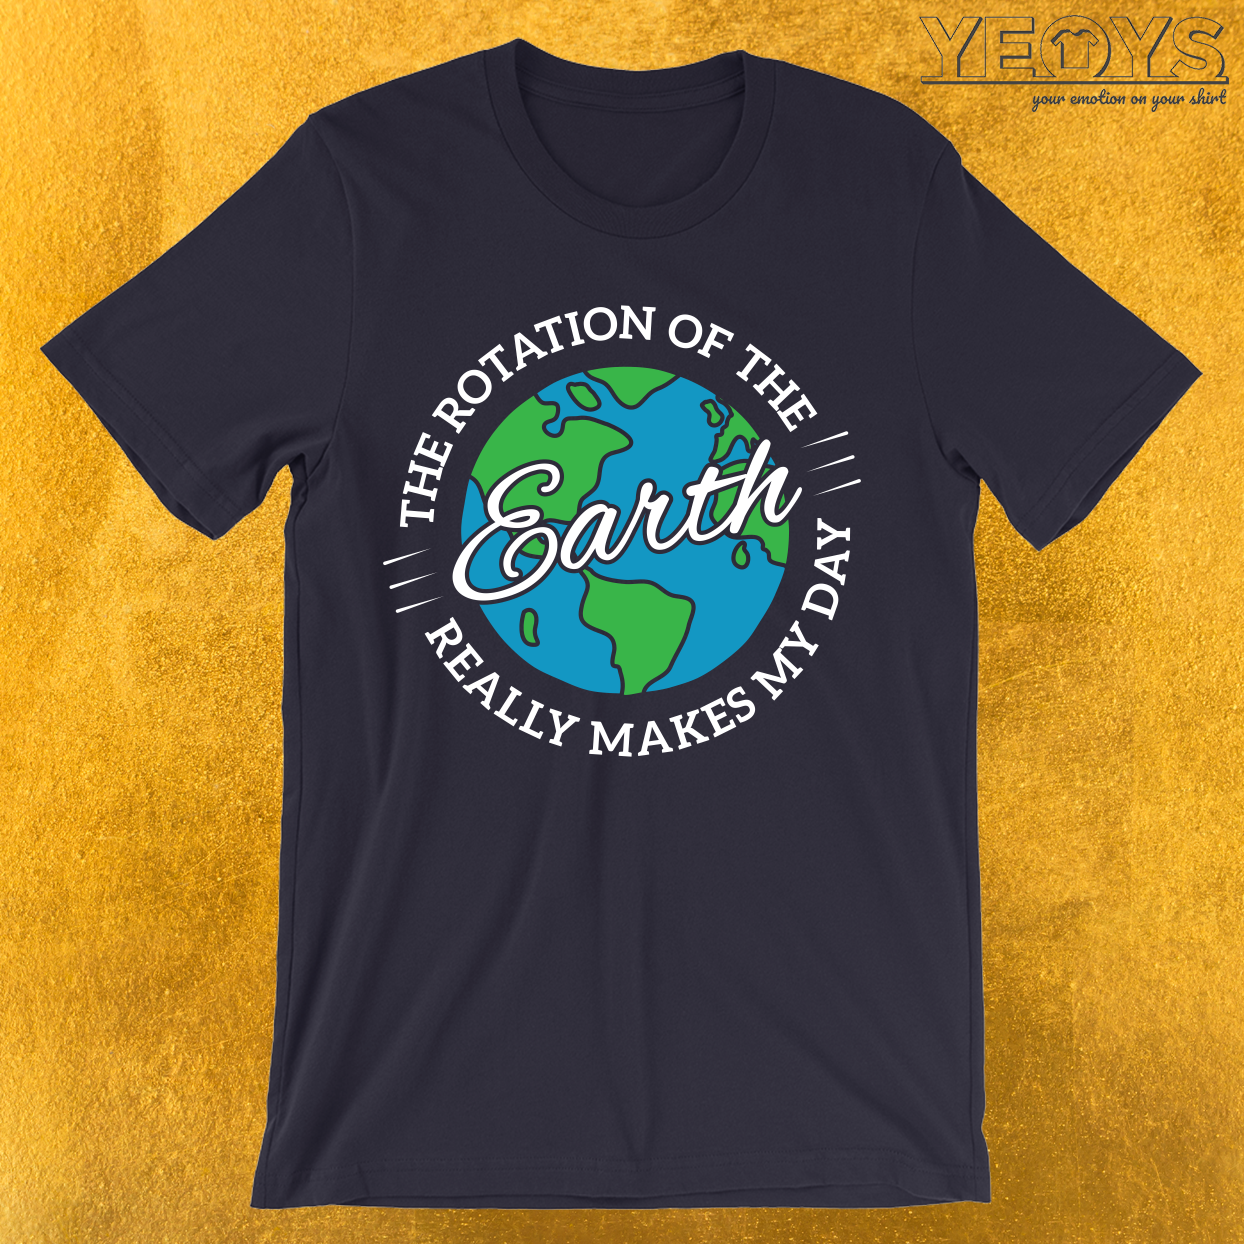 The Rotation Of The Earth T-Shirt